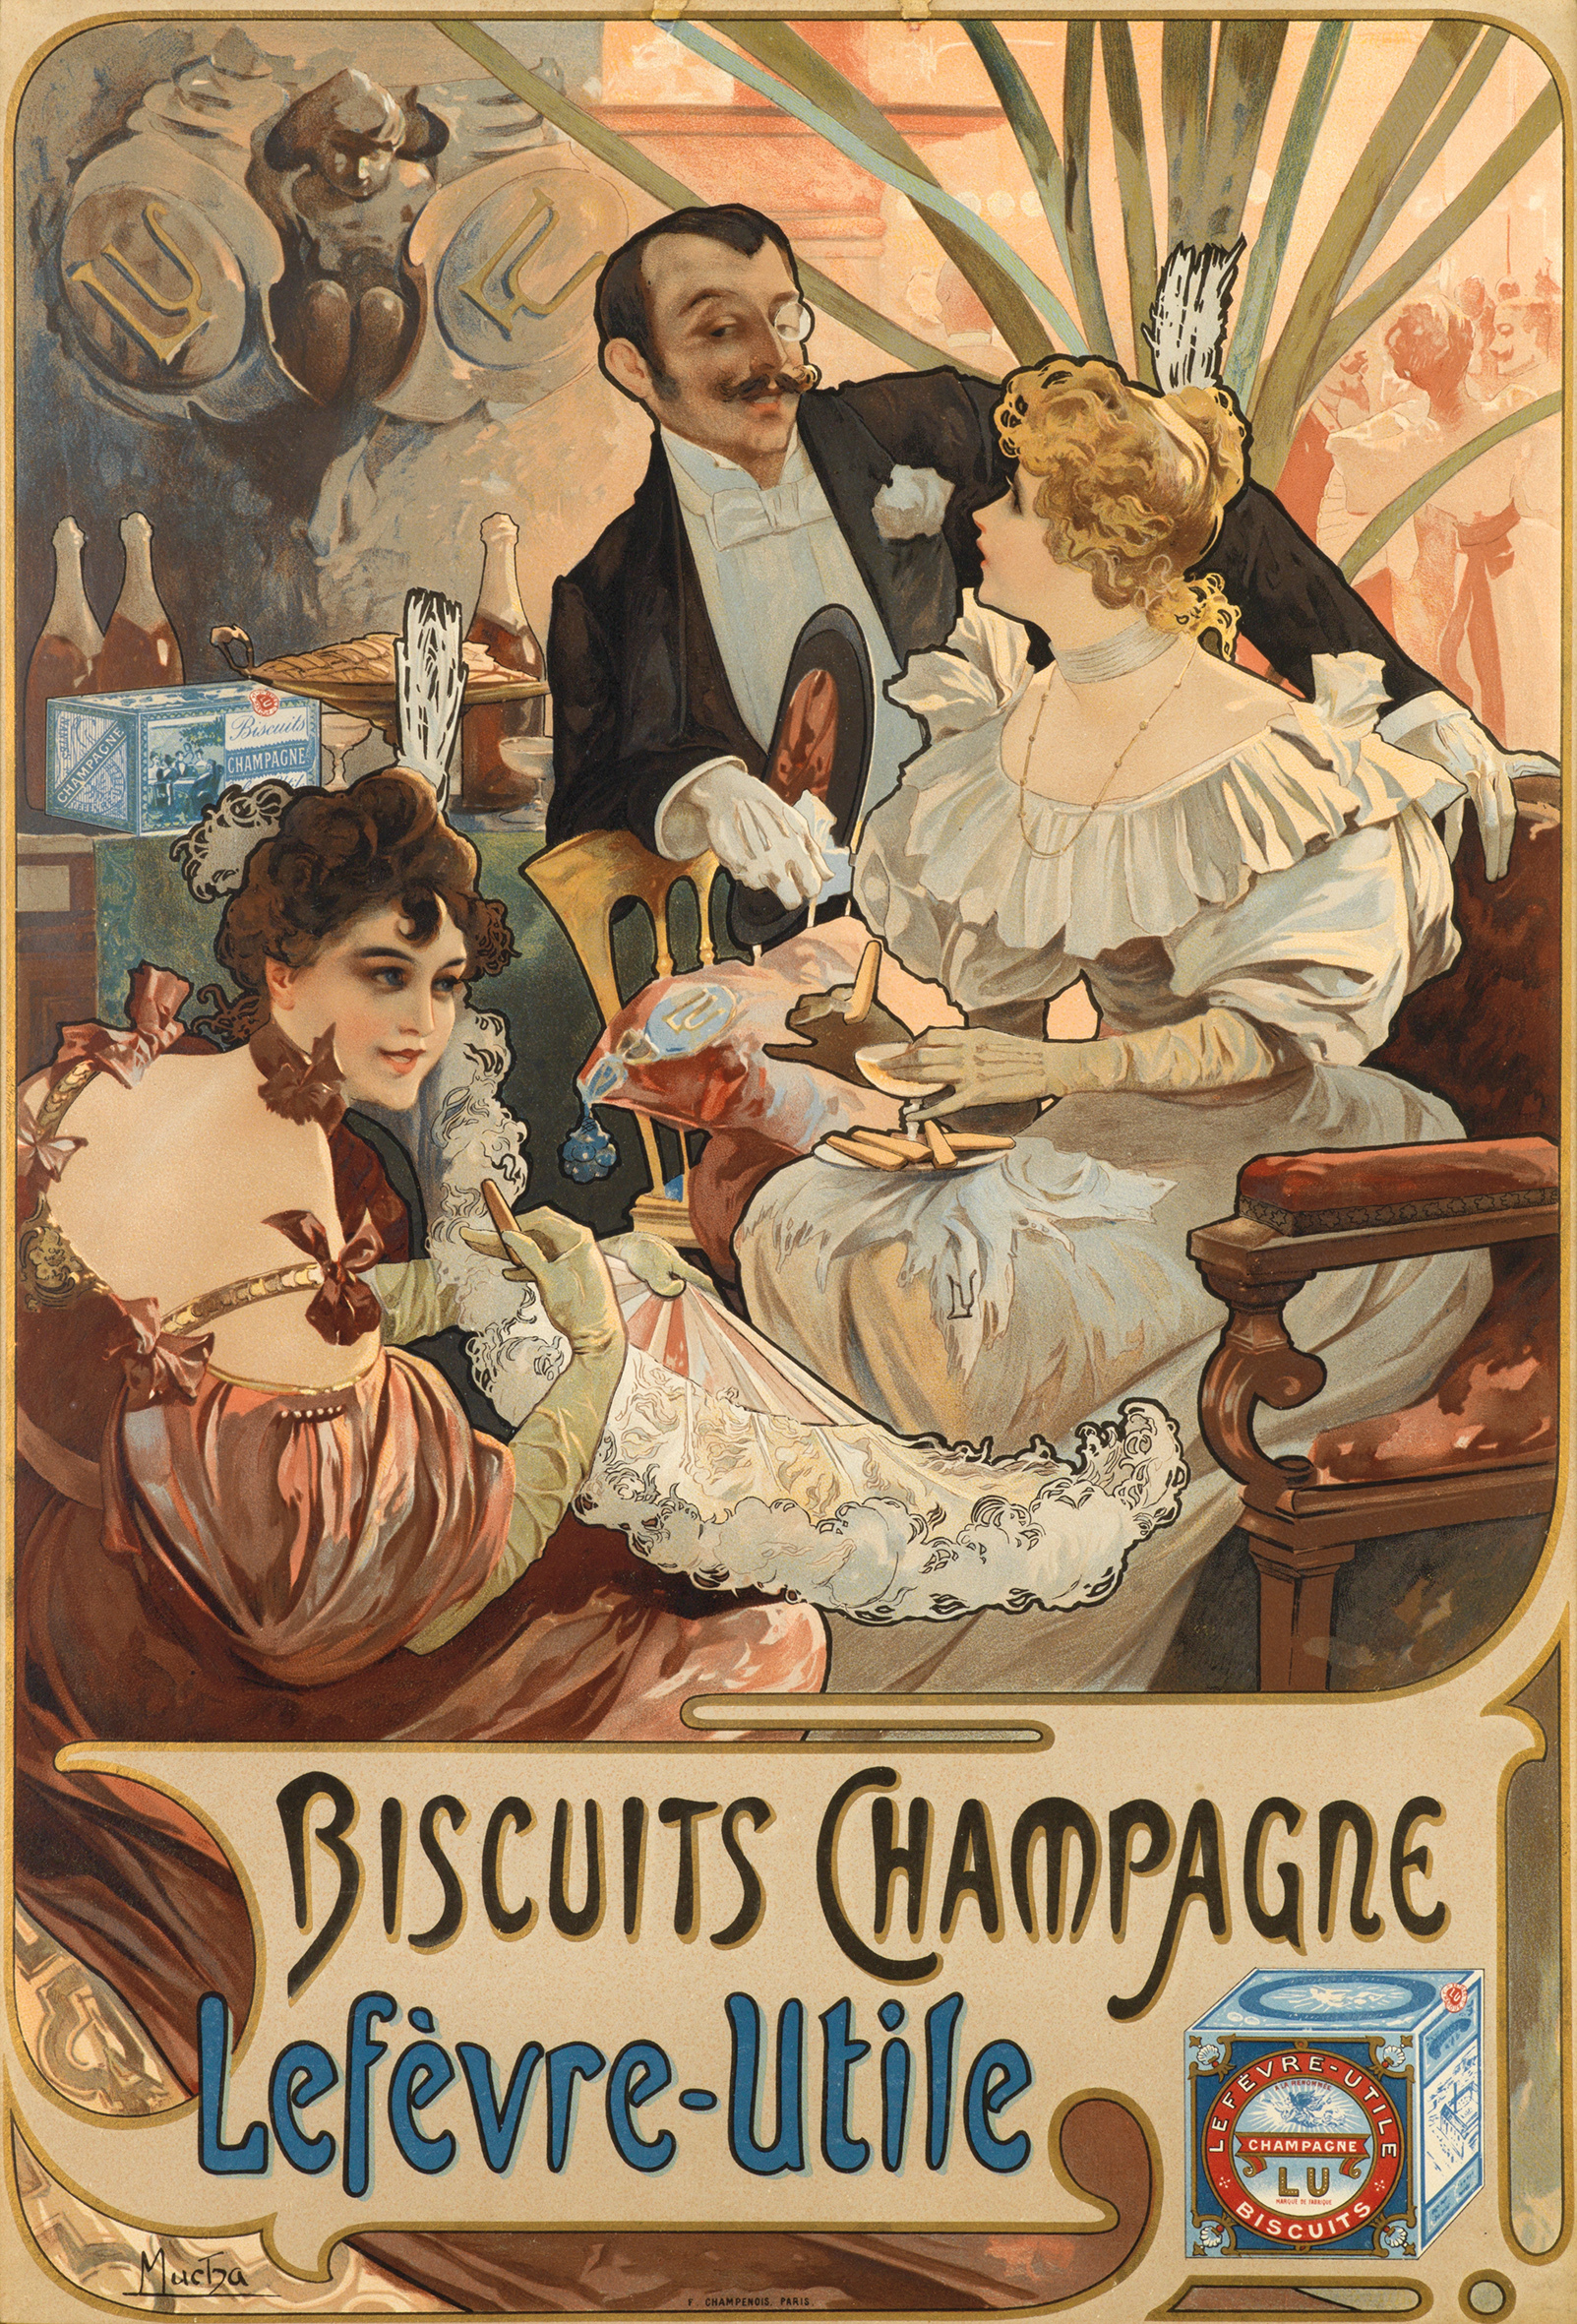 A poster of a tuxedo man approaching 2 woman in a party with champagne bottles behind them.